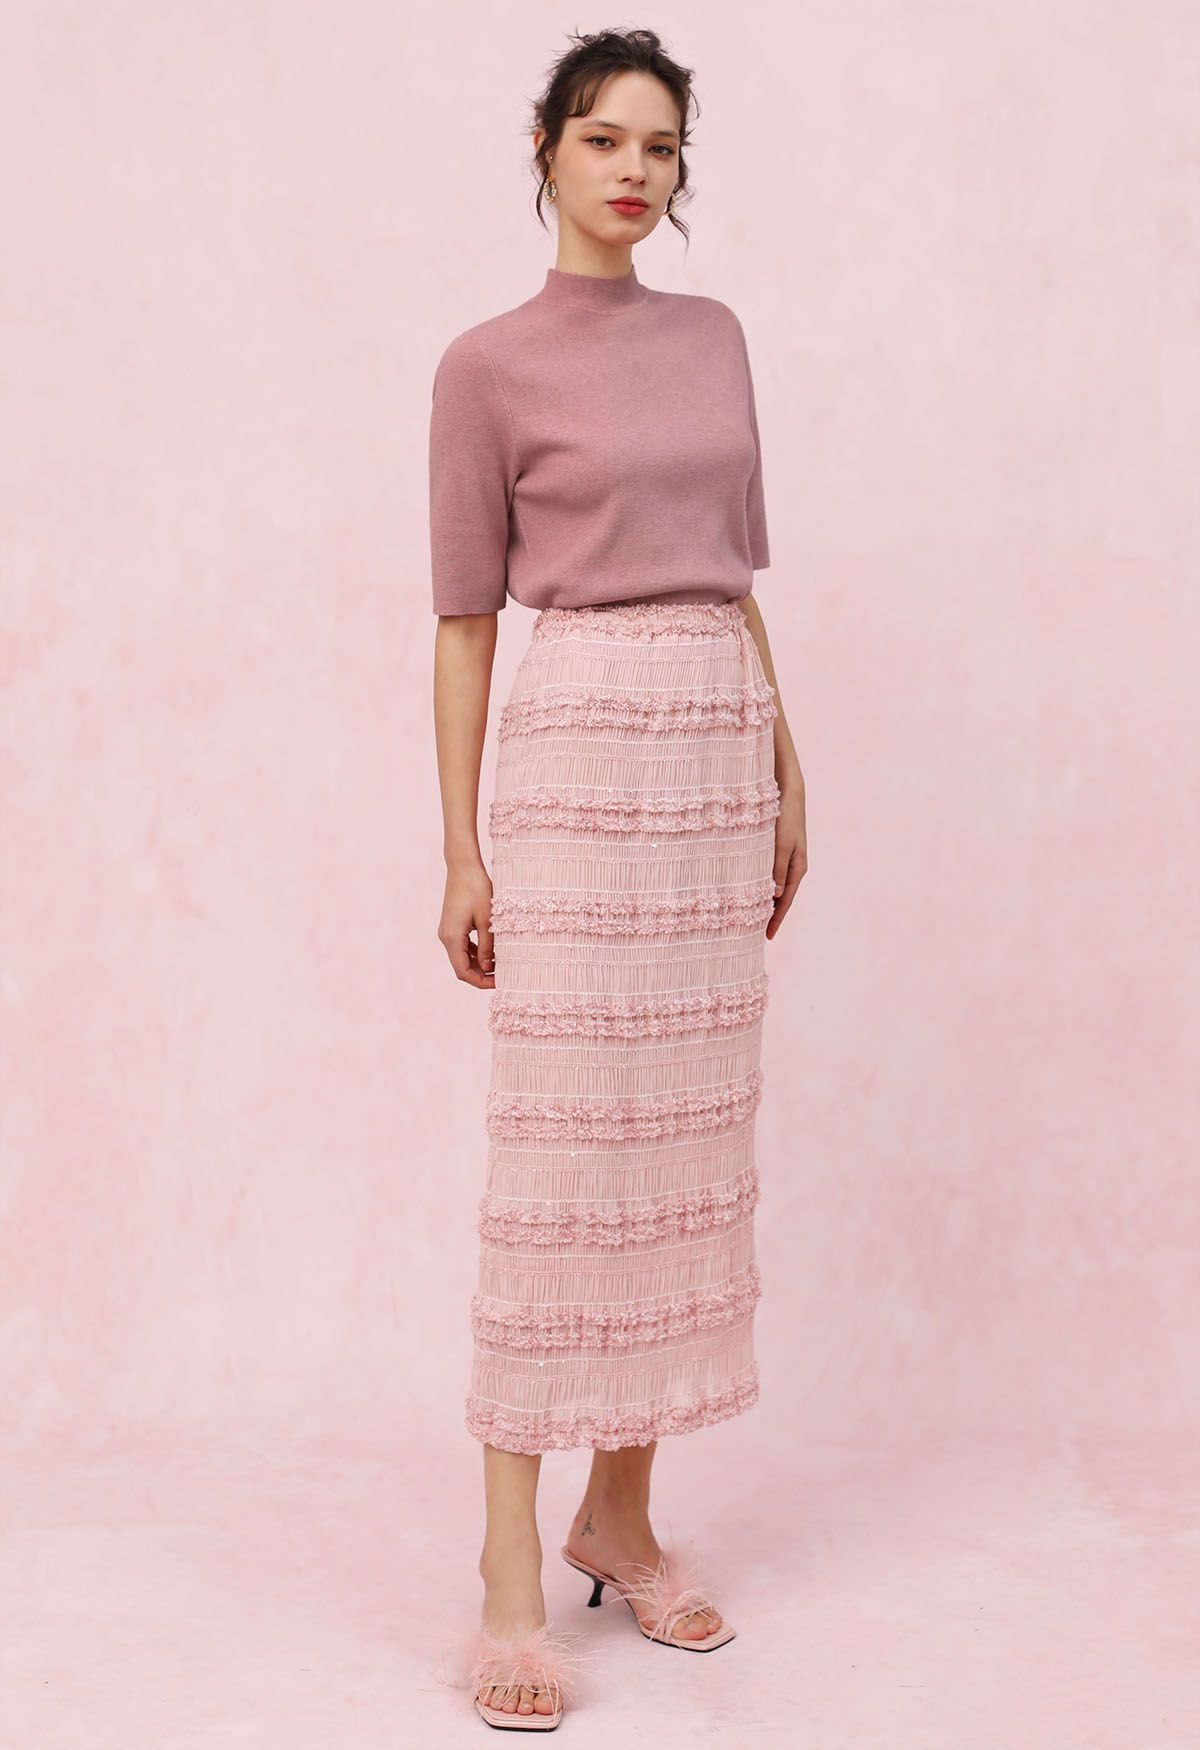 Ruched Mesh Fuzzy Sequin Pencil Skirt in Pink